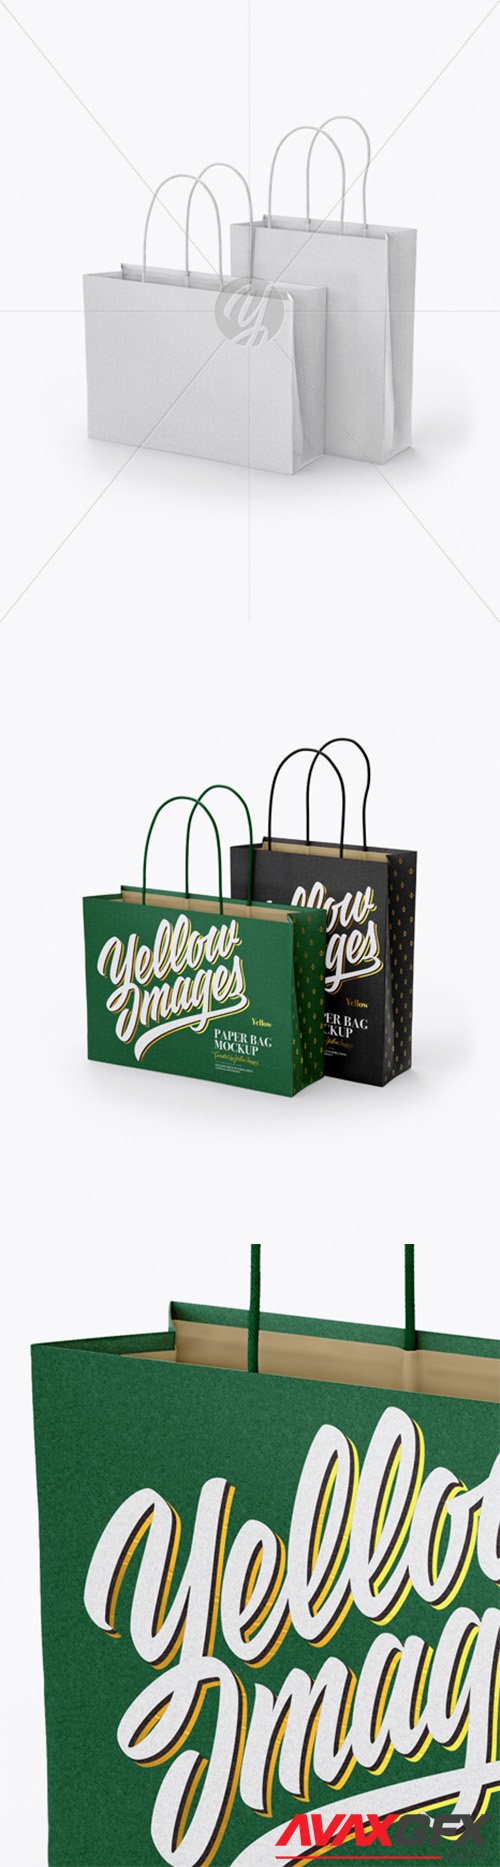 Two Paper Bags Mockup - Half Side View 27690